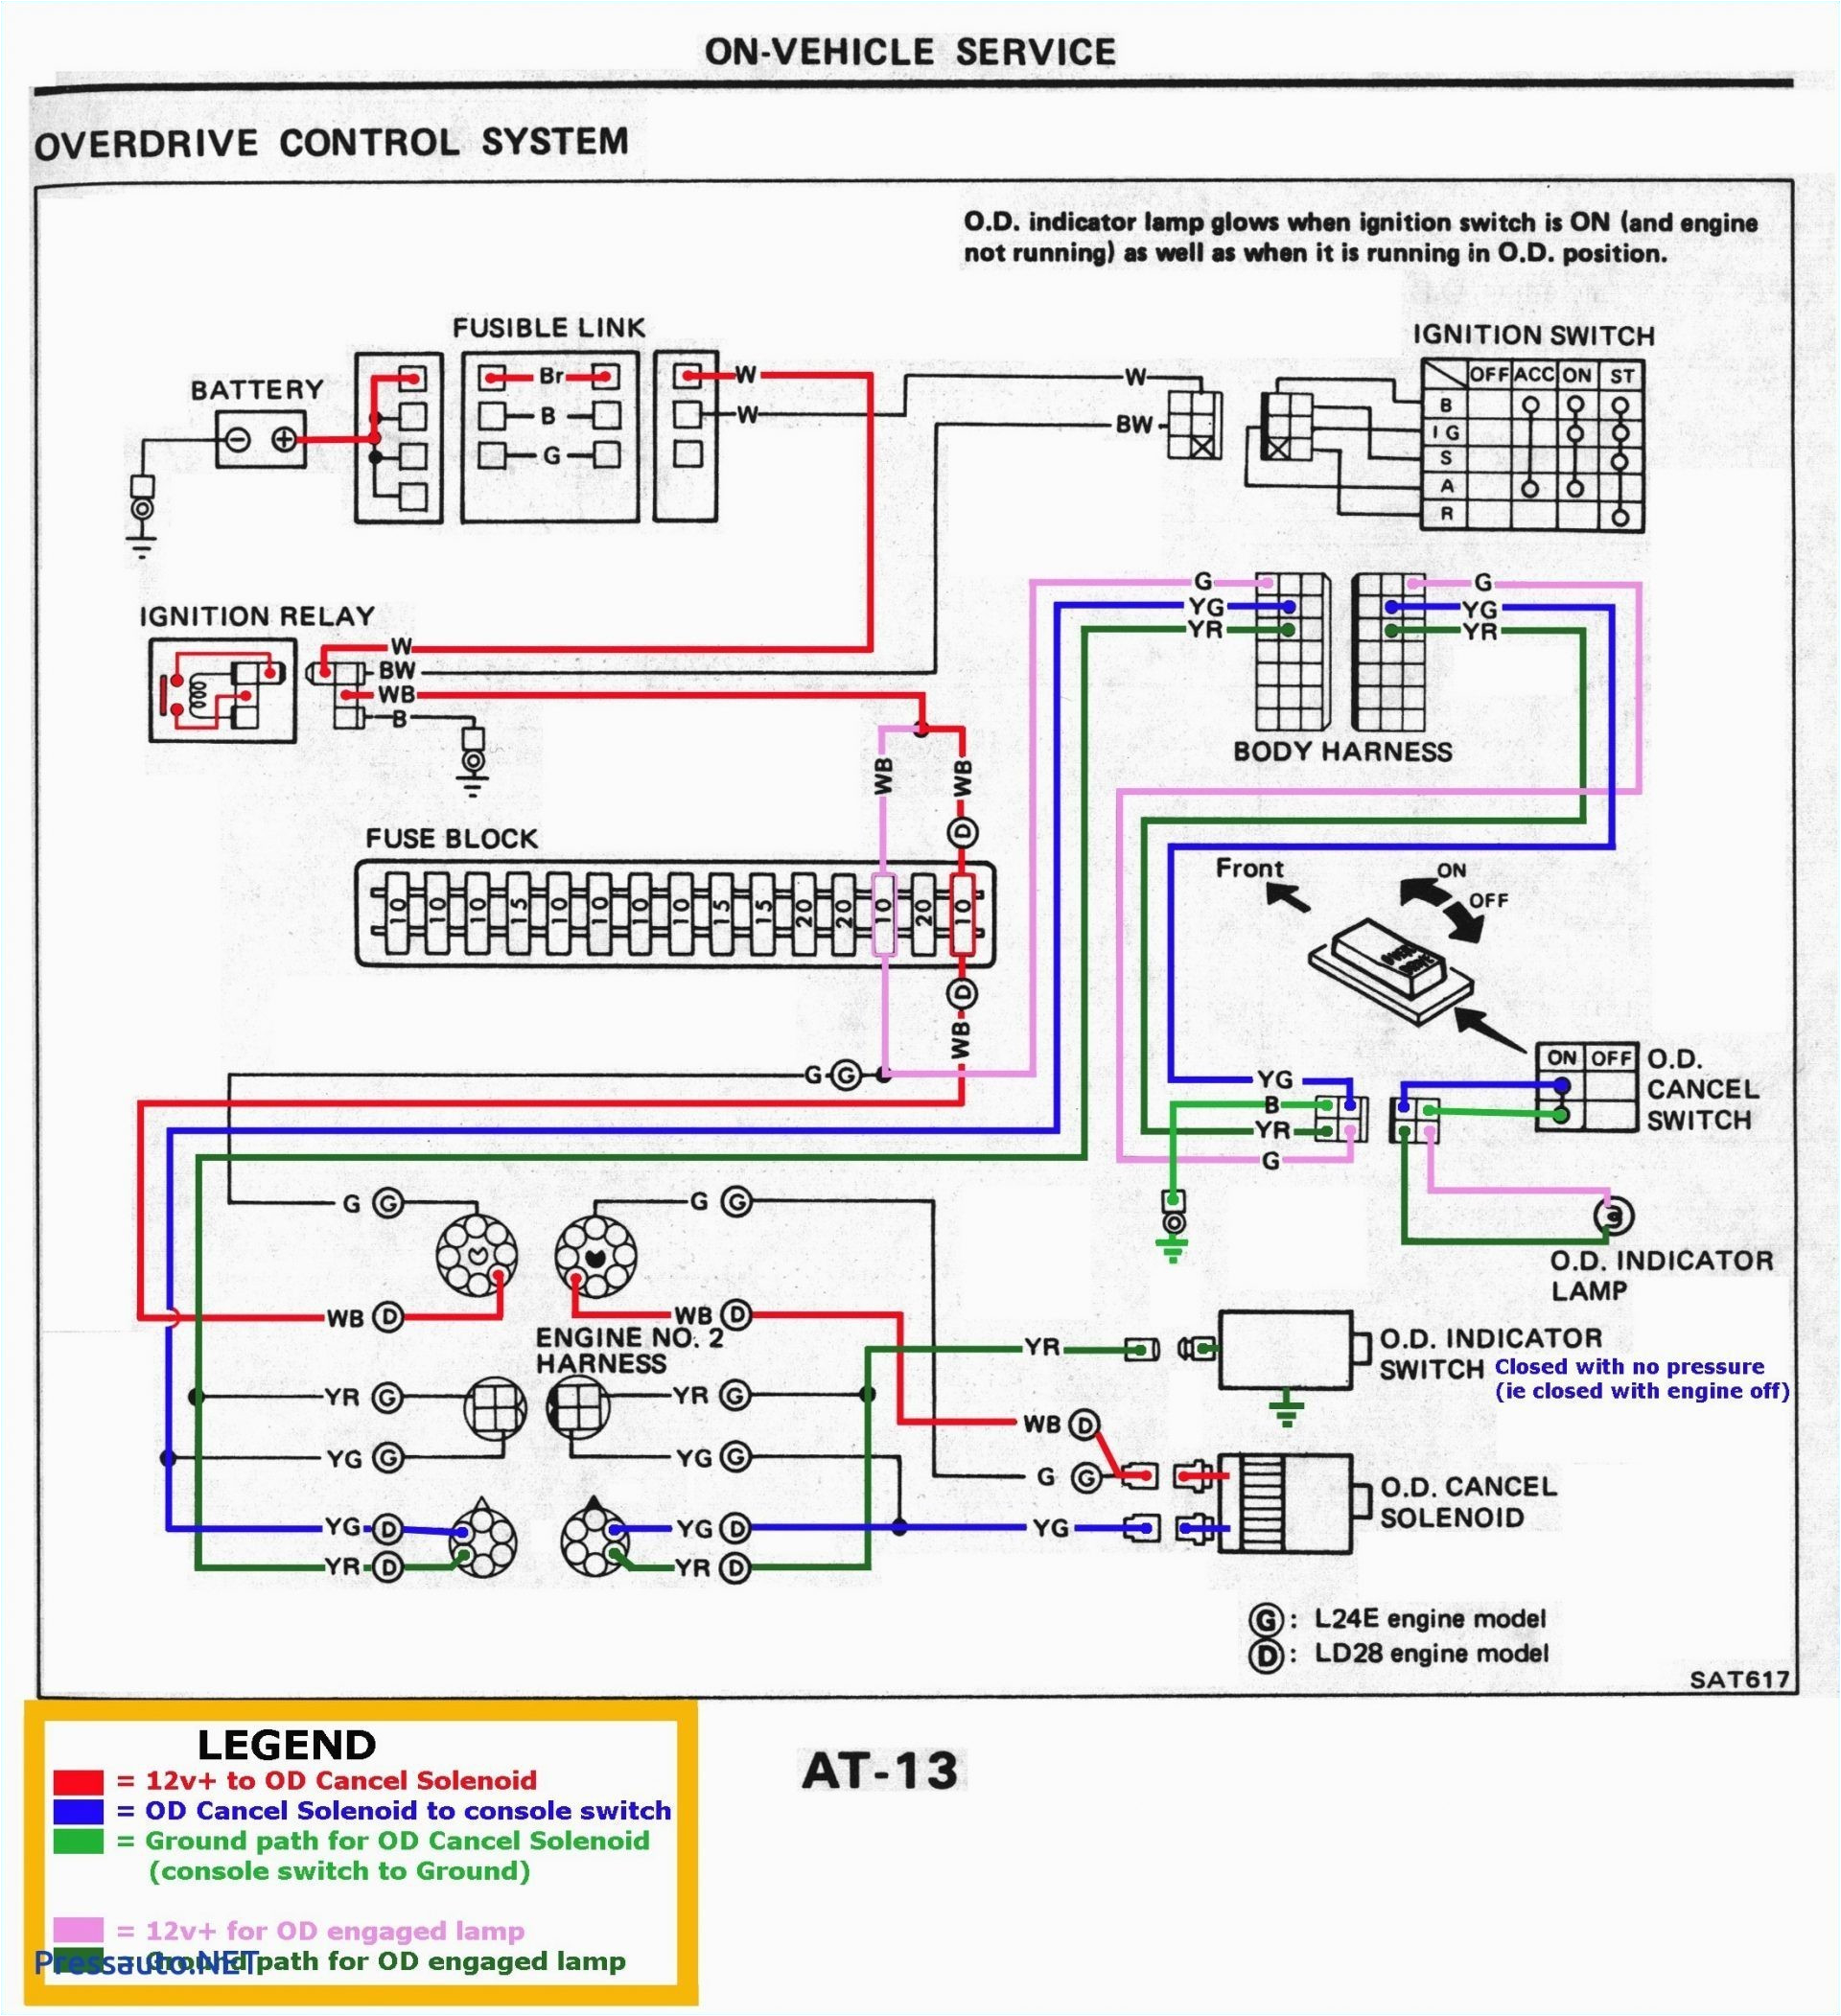 Briggs and Stratton Ignition Coil Wiring Diagram 88 Dodge Truck Wiring Diagram Wiring Diagram Name